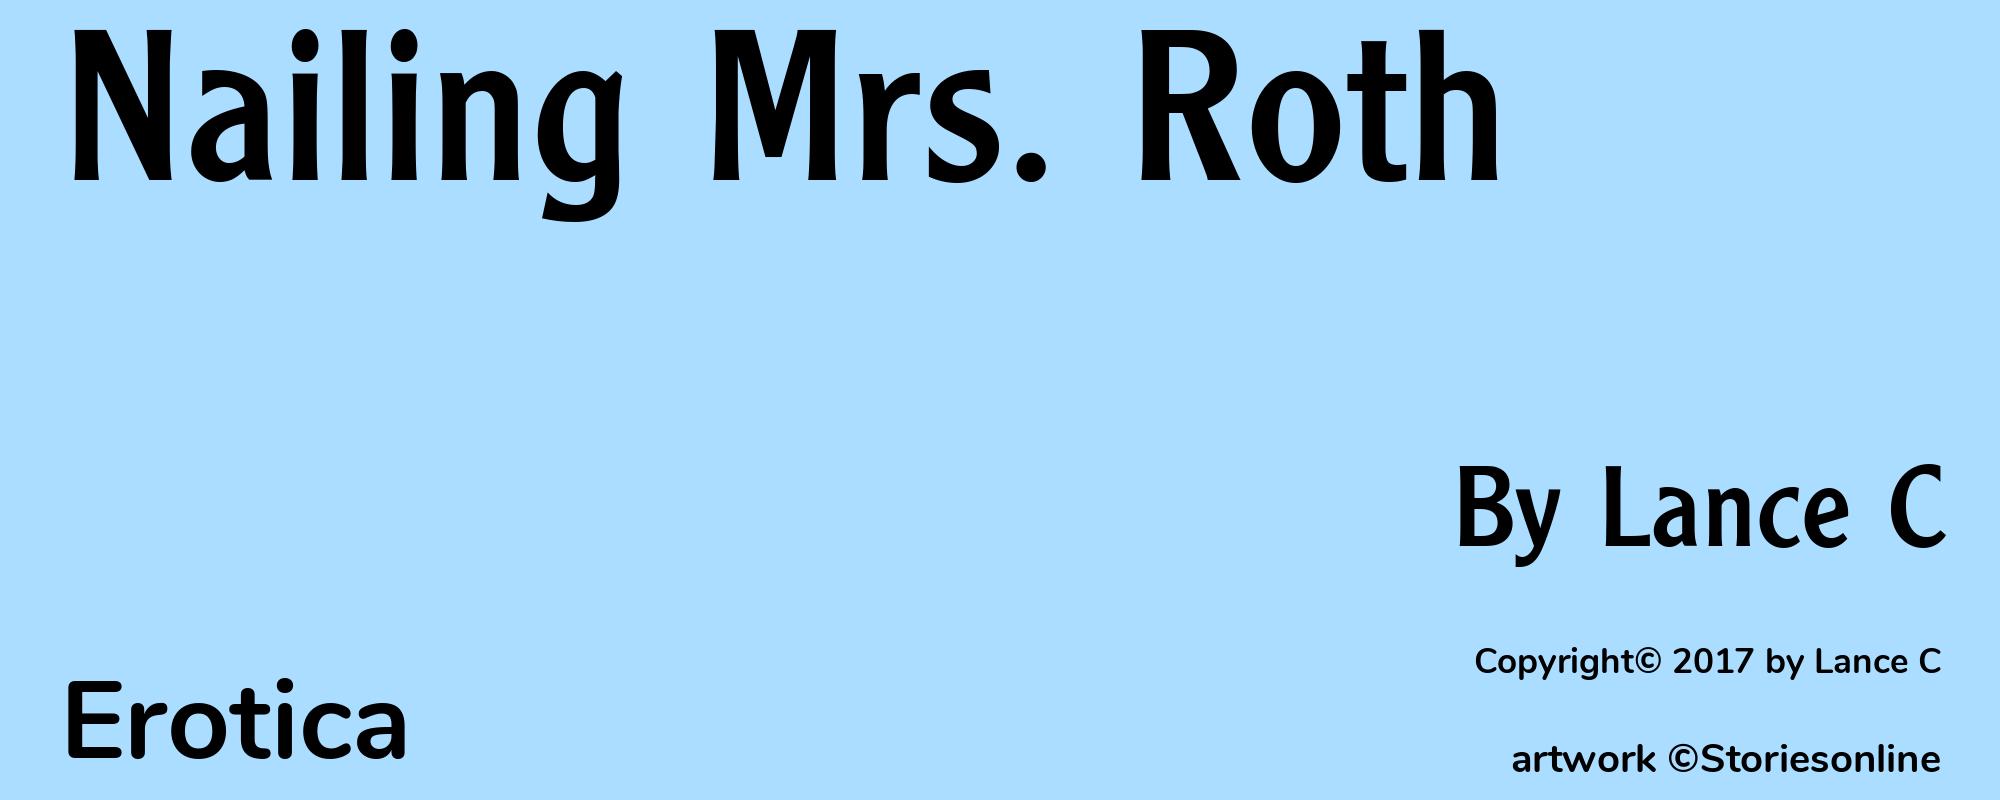 Nailing Mrs. Roth - Cover